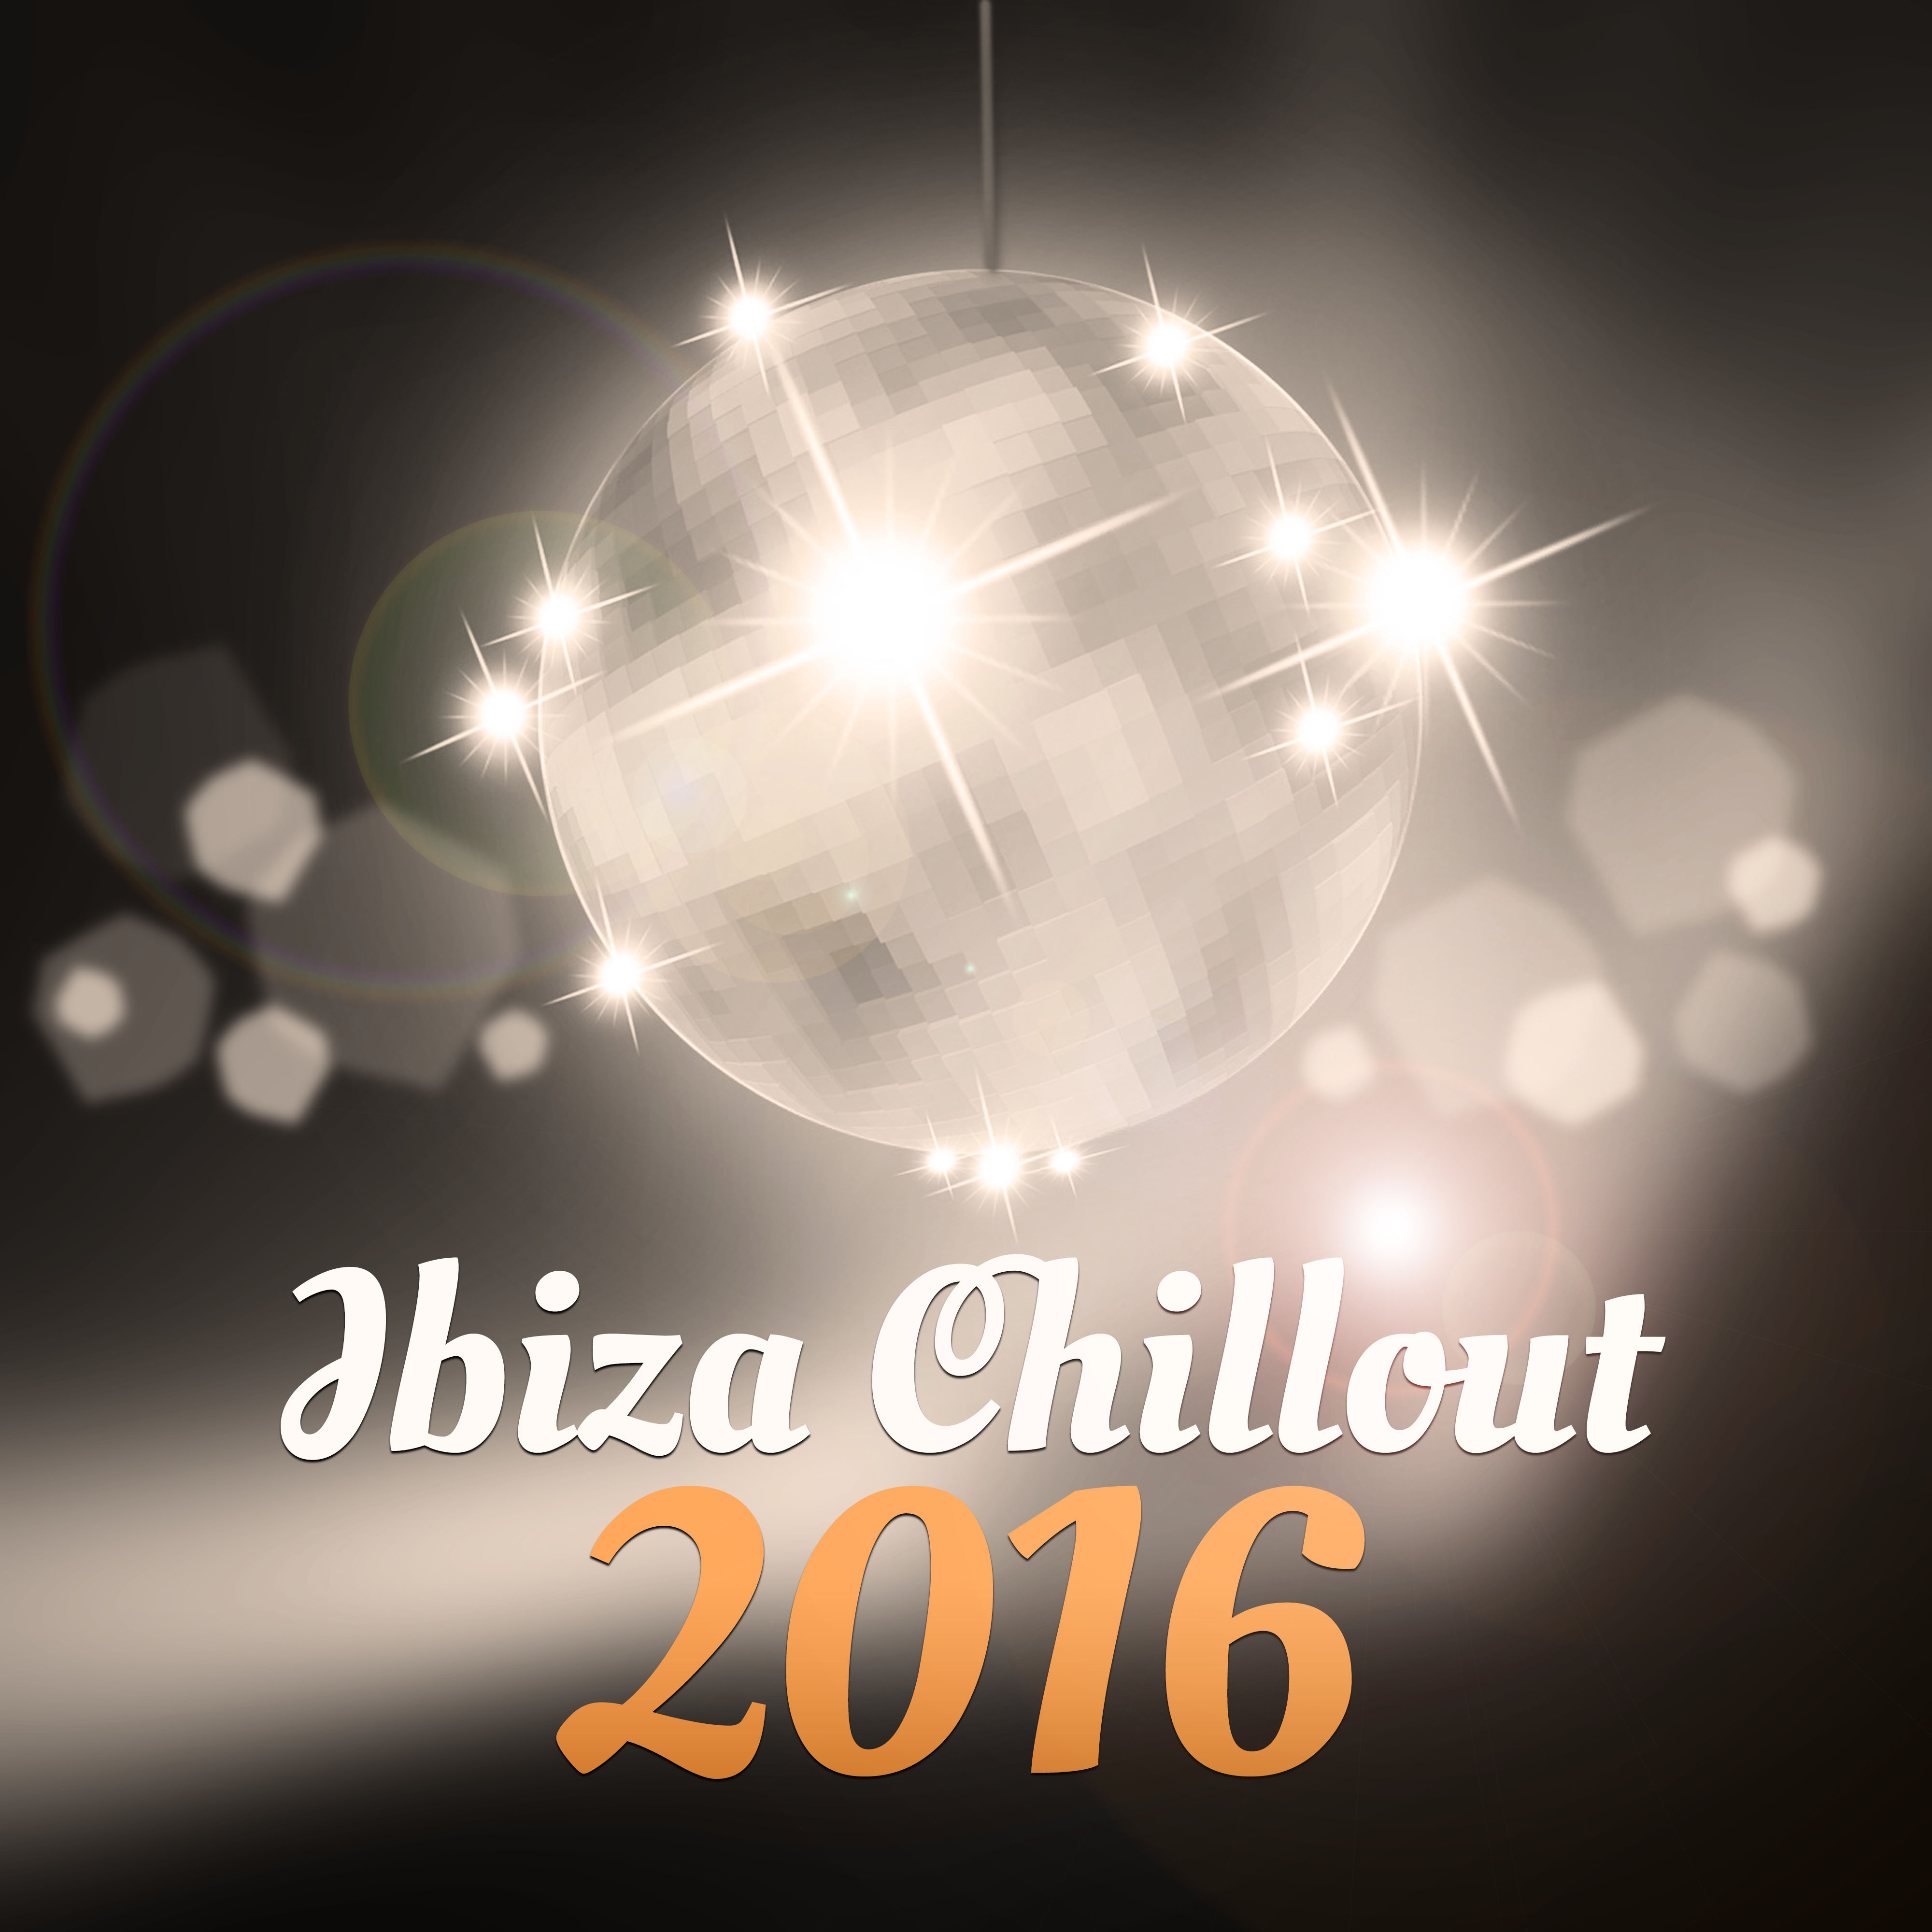 Ibiza Chillout 2016 - Lounge Music, Weekend Chill Out, Total Chillout